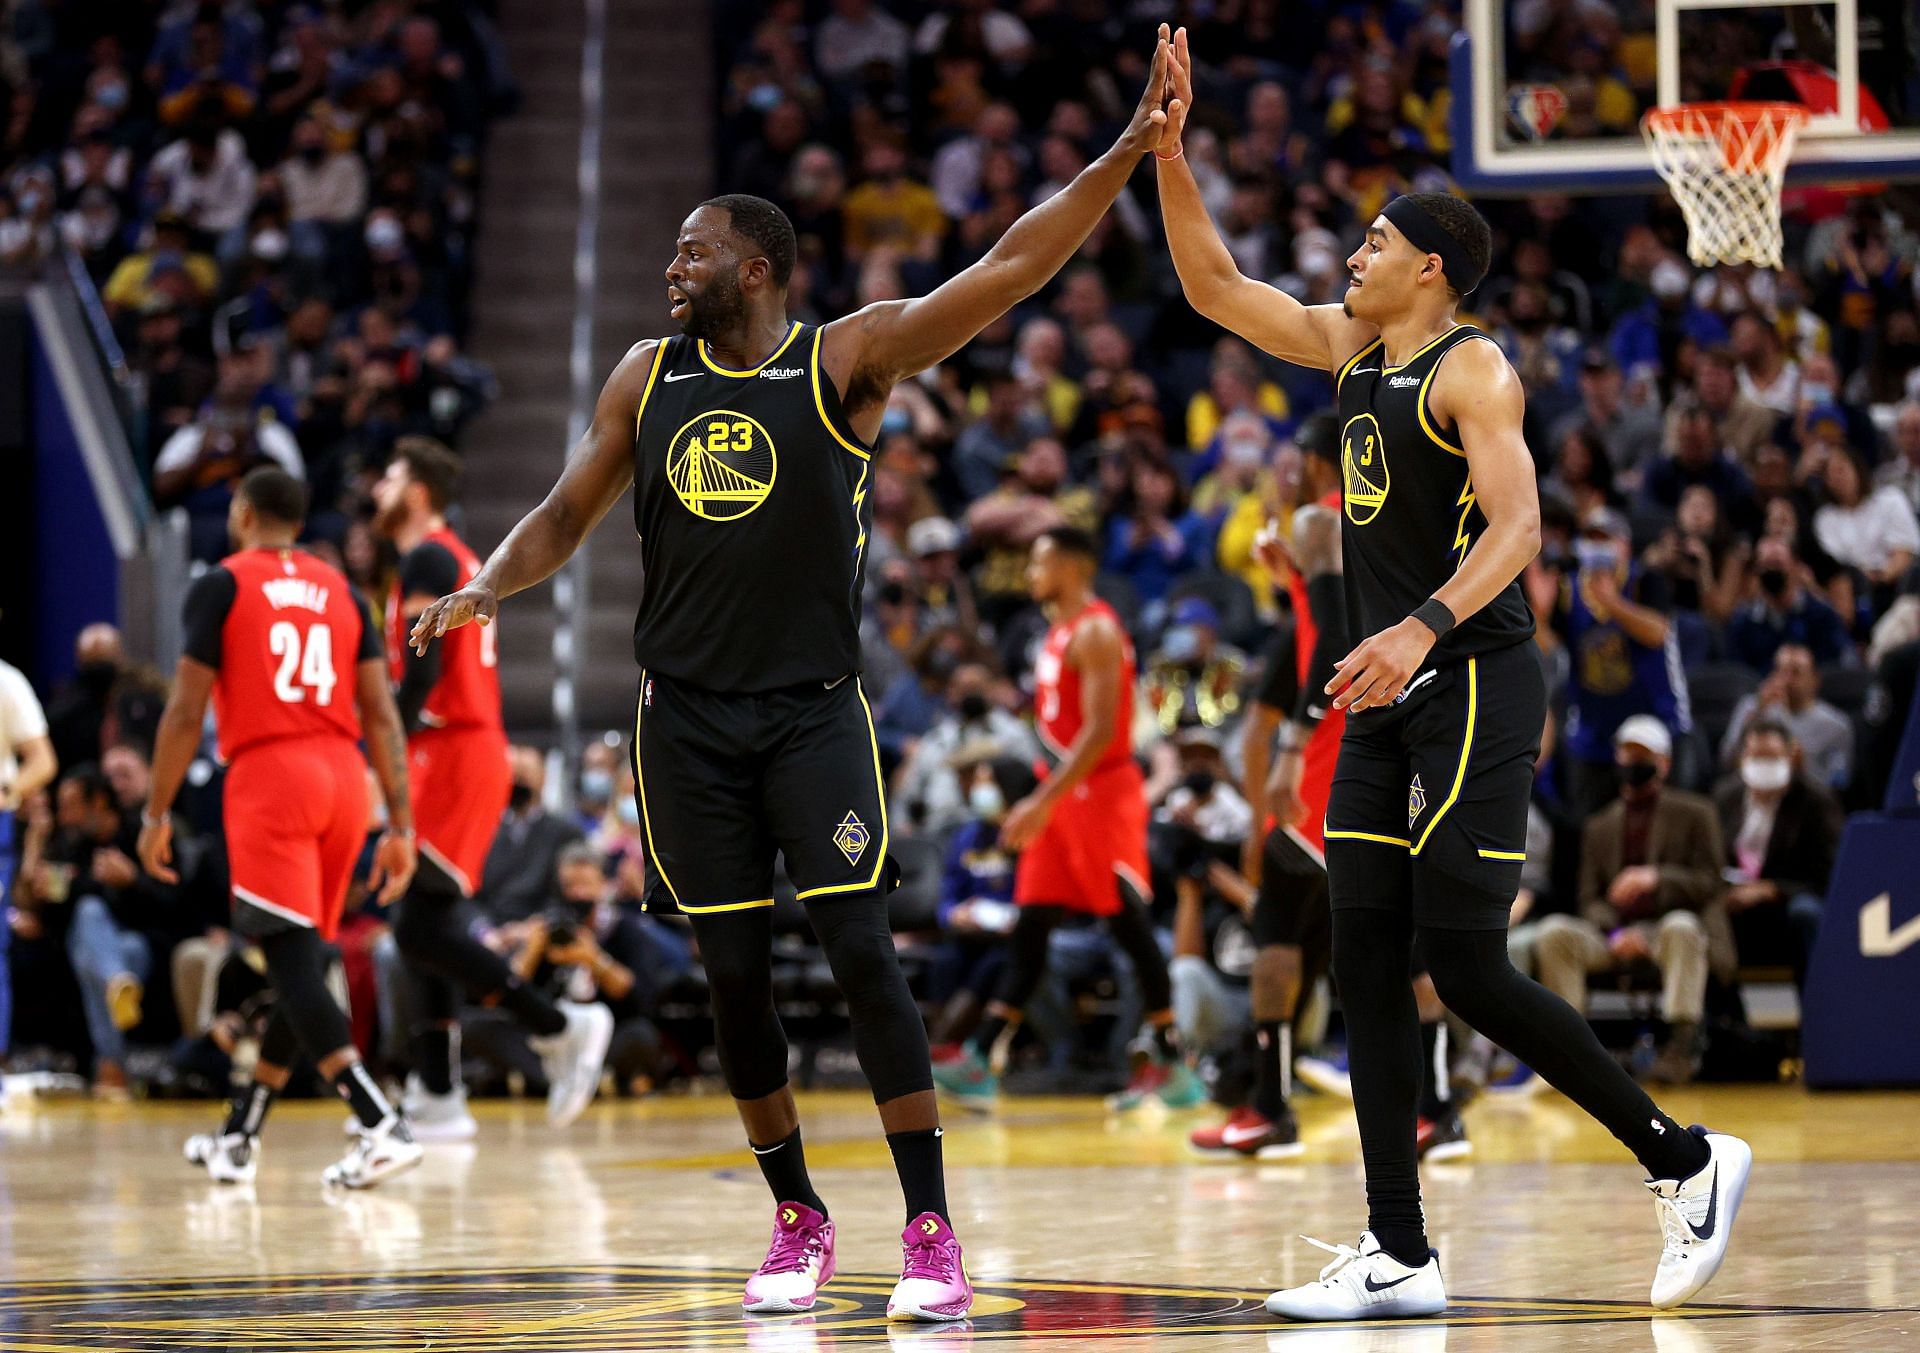 Looking like money': Warriors star Draymond Green busts out epic pre-game  outfit ahead of opening night vs. Lakers